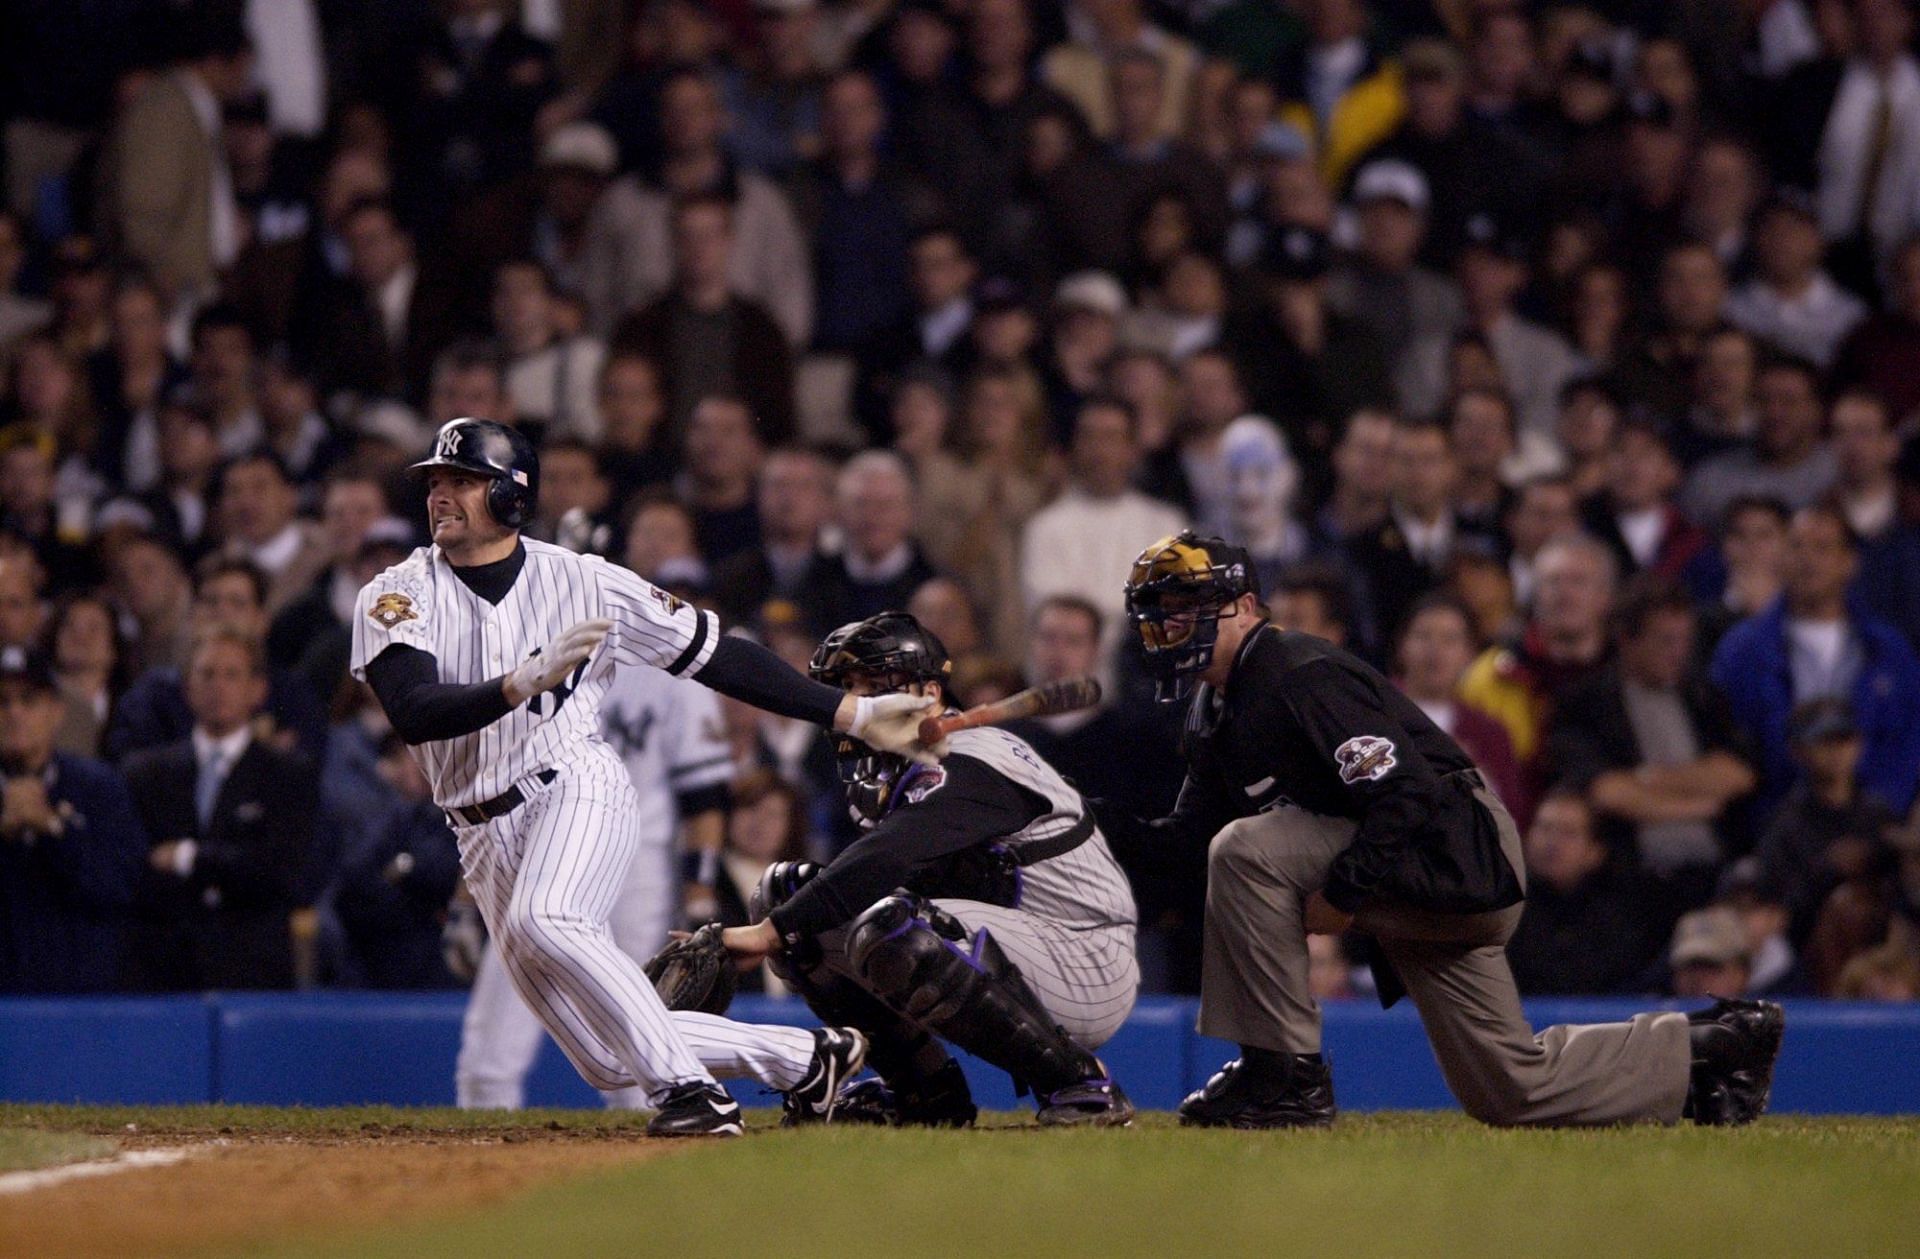 Former Yankee Chuck Knoblauch charged with assaulting ex-wife